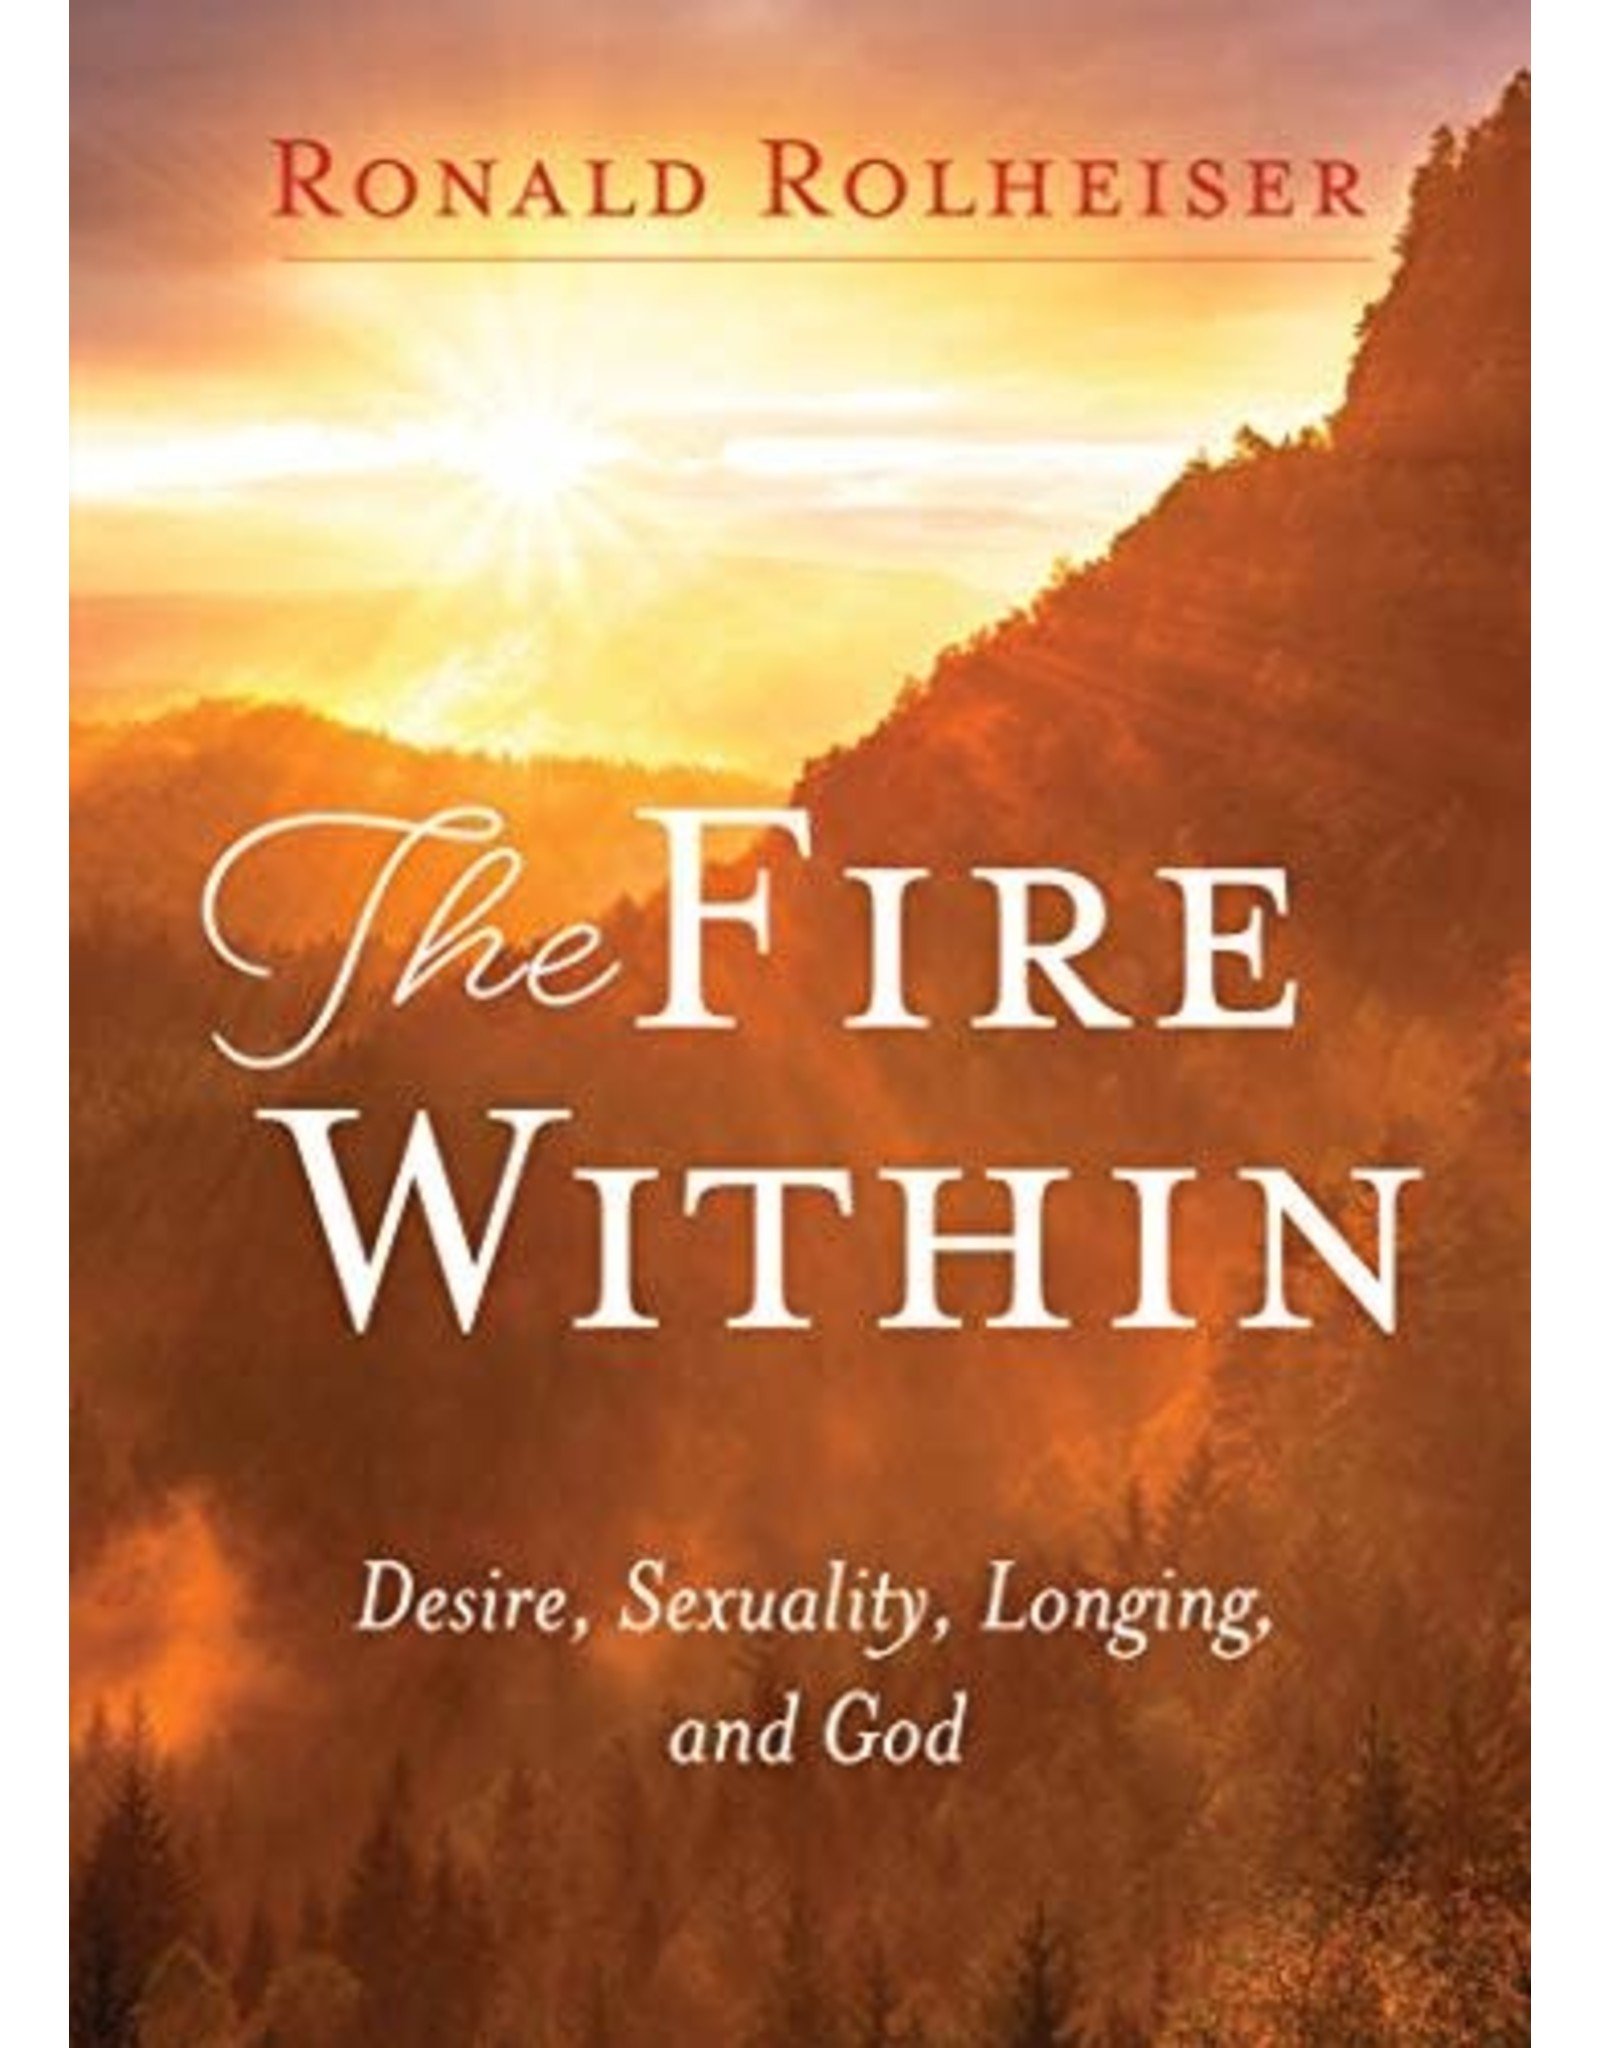 Paraclete Press The Fire Within: Desire, Sexuality, Longing, and God by Ronald Rolheiser (Paperback)